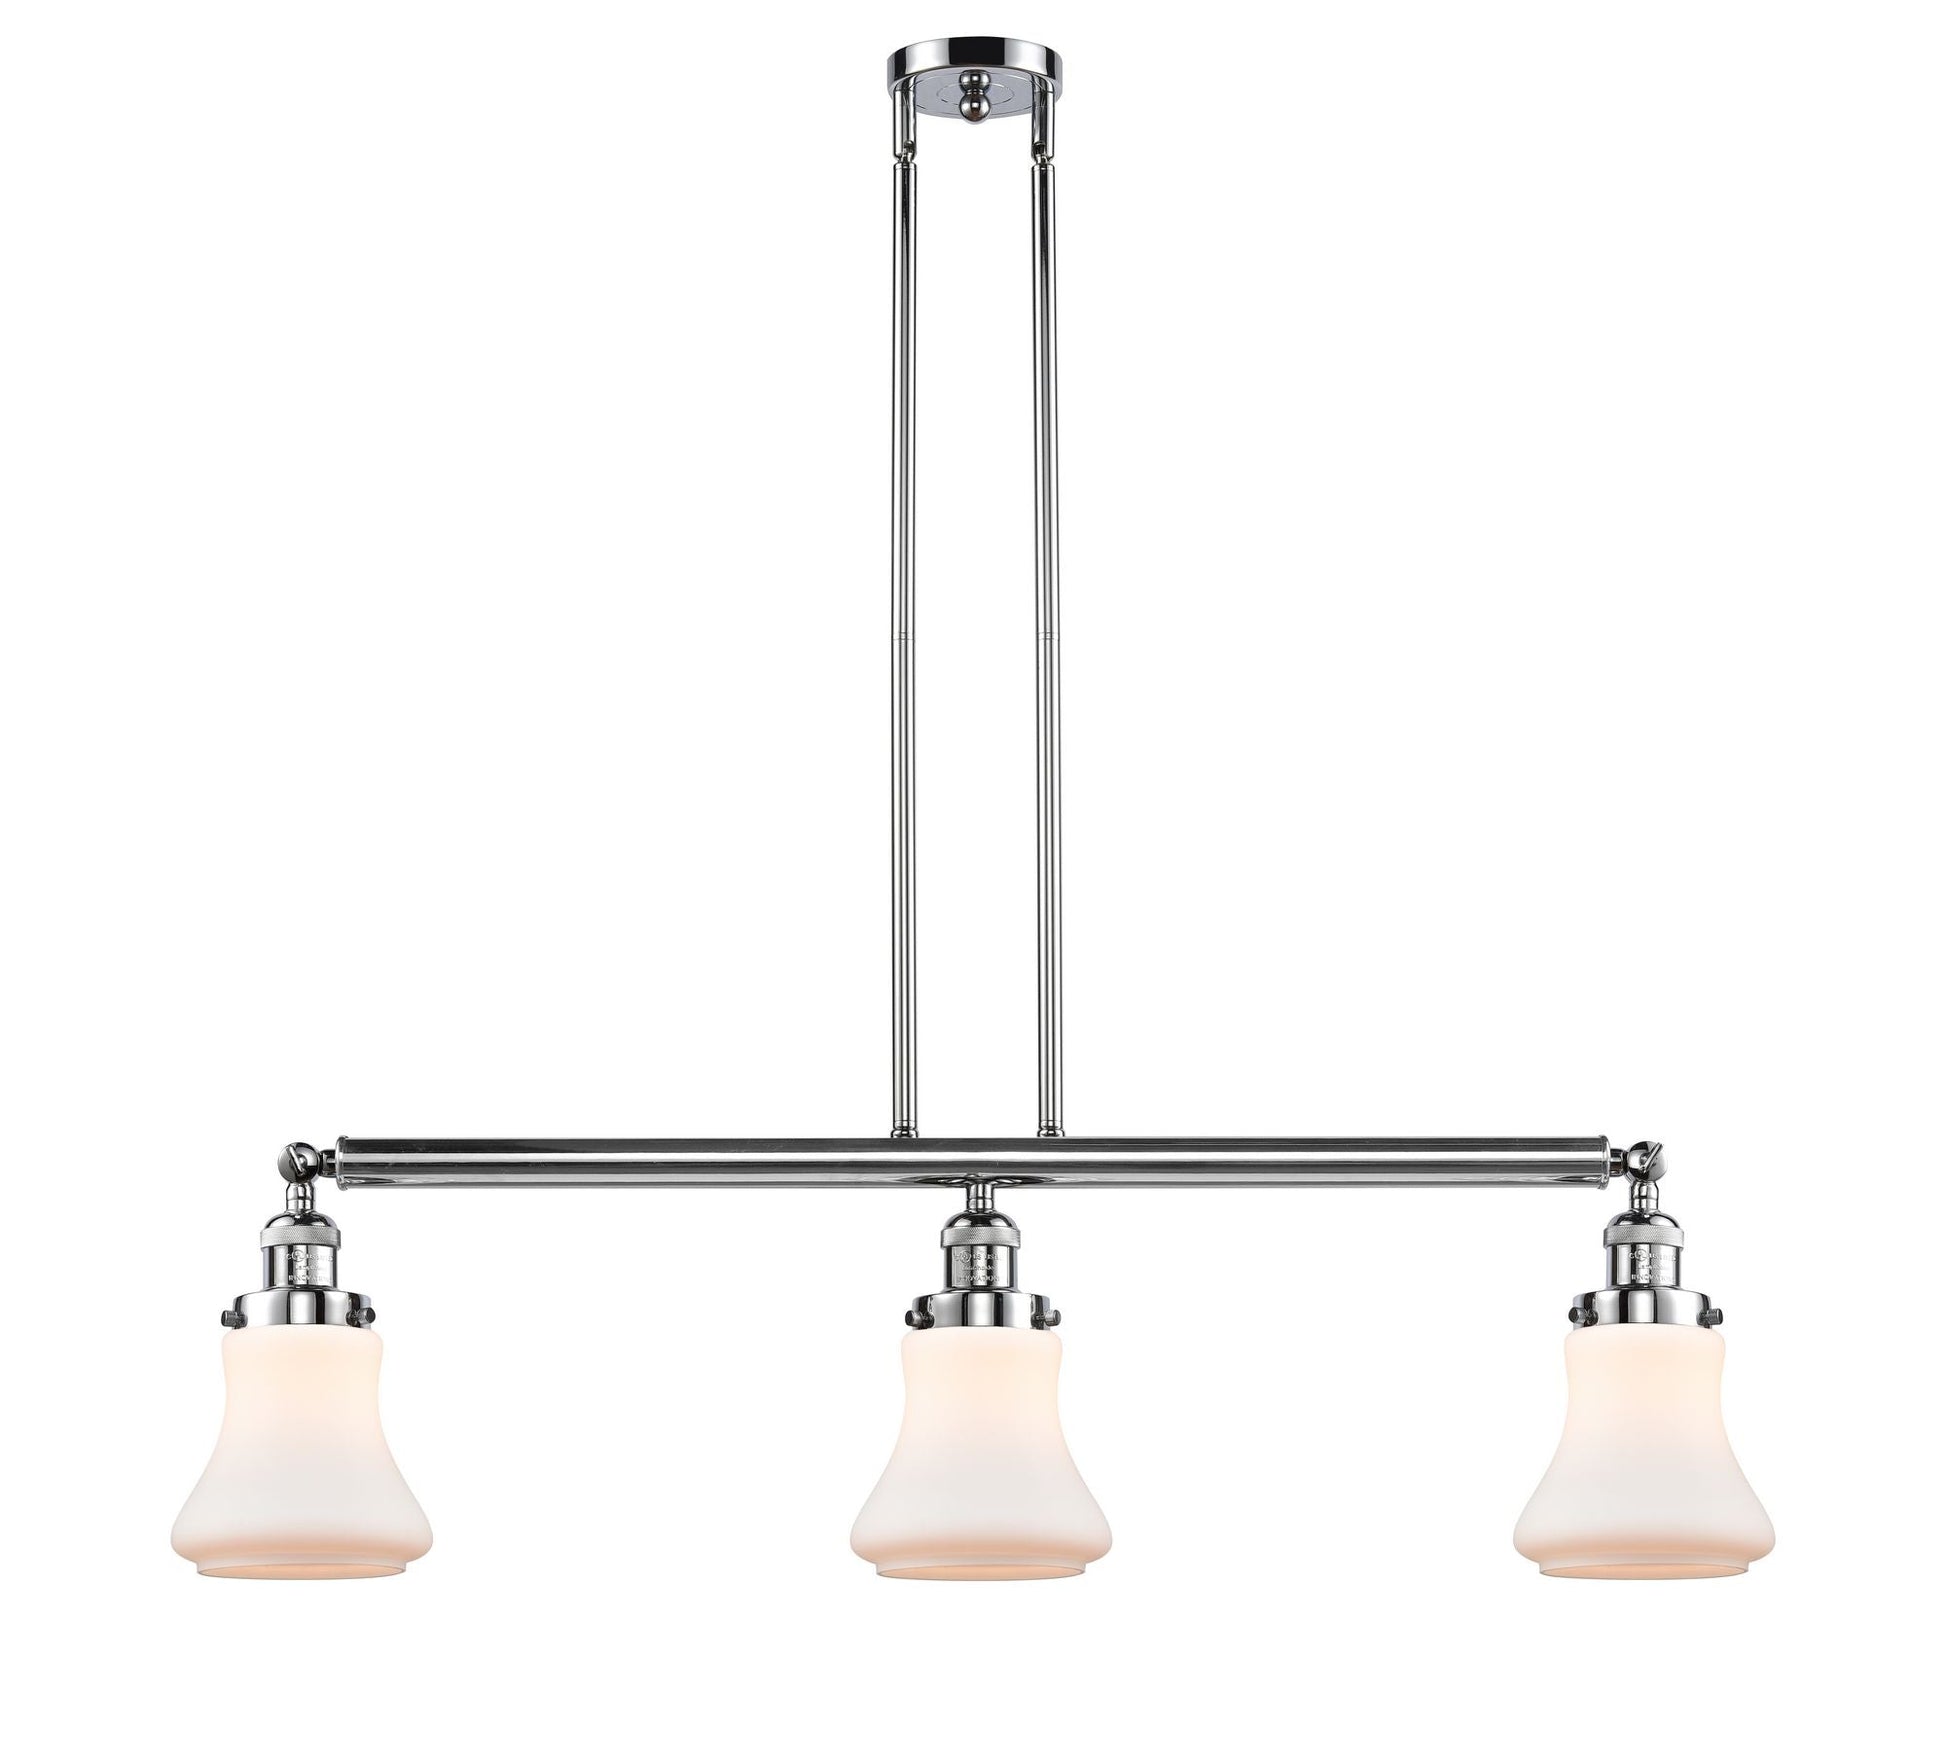 213-PC-G191 3-Light 38.75" Polished Chrome Island Light - Matte White Bellmont Glass - LED Bulb - Dimmensions: 38.75 x 6.25 x 11<br>Minimum Height : 20.5<br>Maximum Height : 44.5 - Sloped Ceiling Compatible: Yes